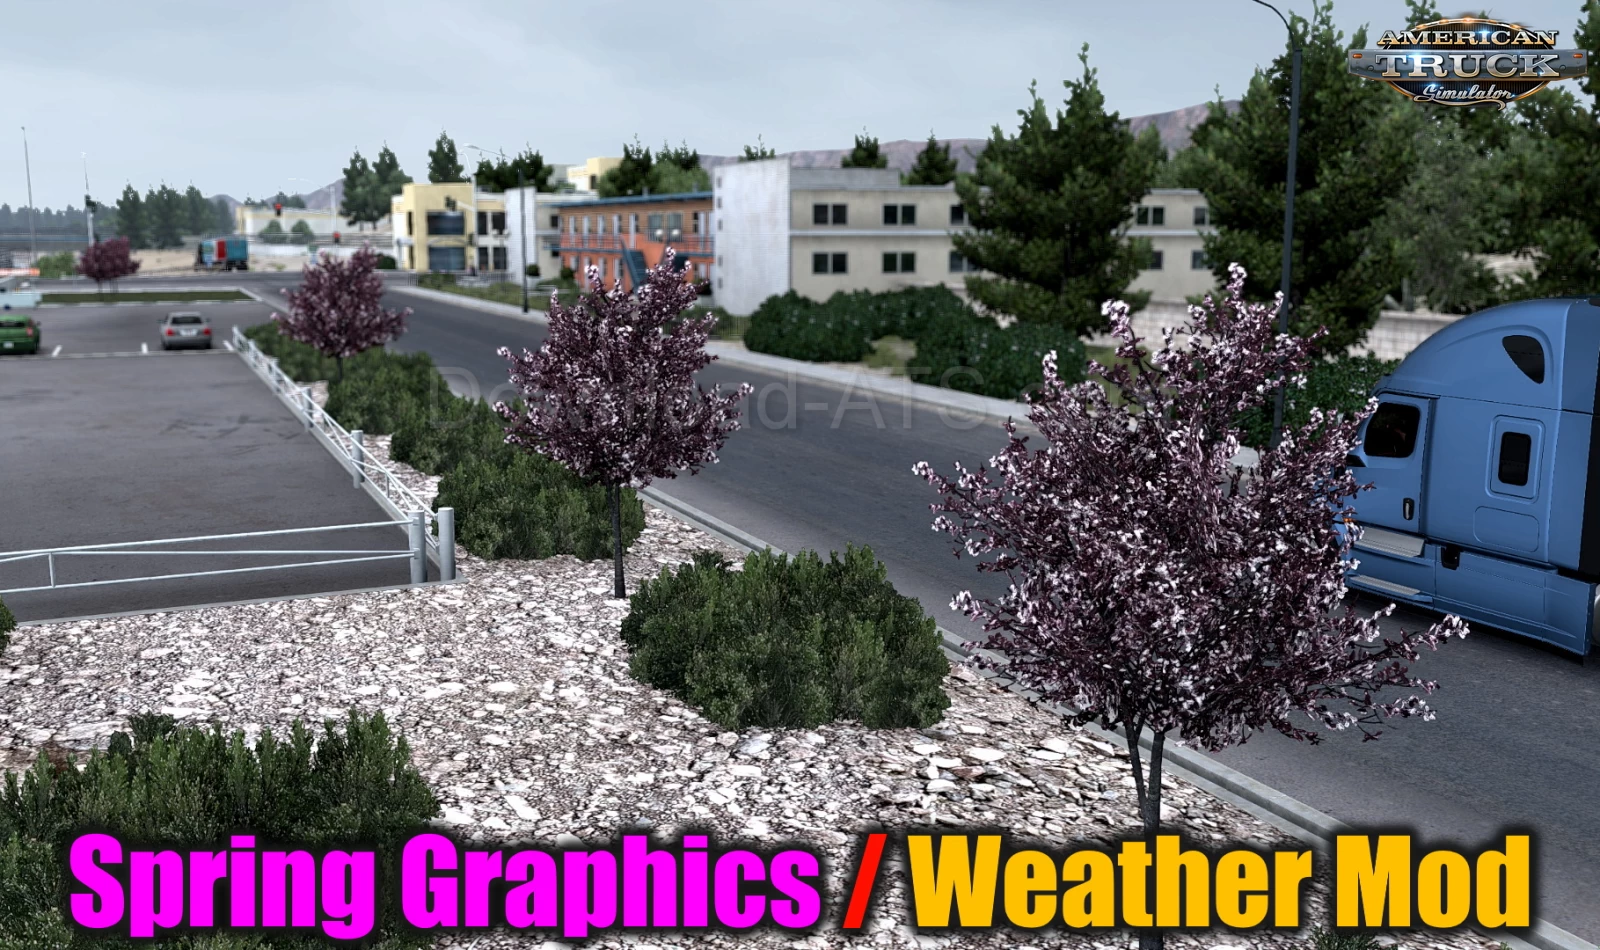 Spring Graphics / Weather Mod v2.6 by Grimes (1.43.x) for ATS